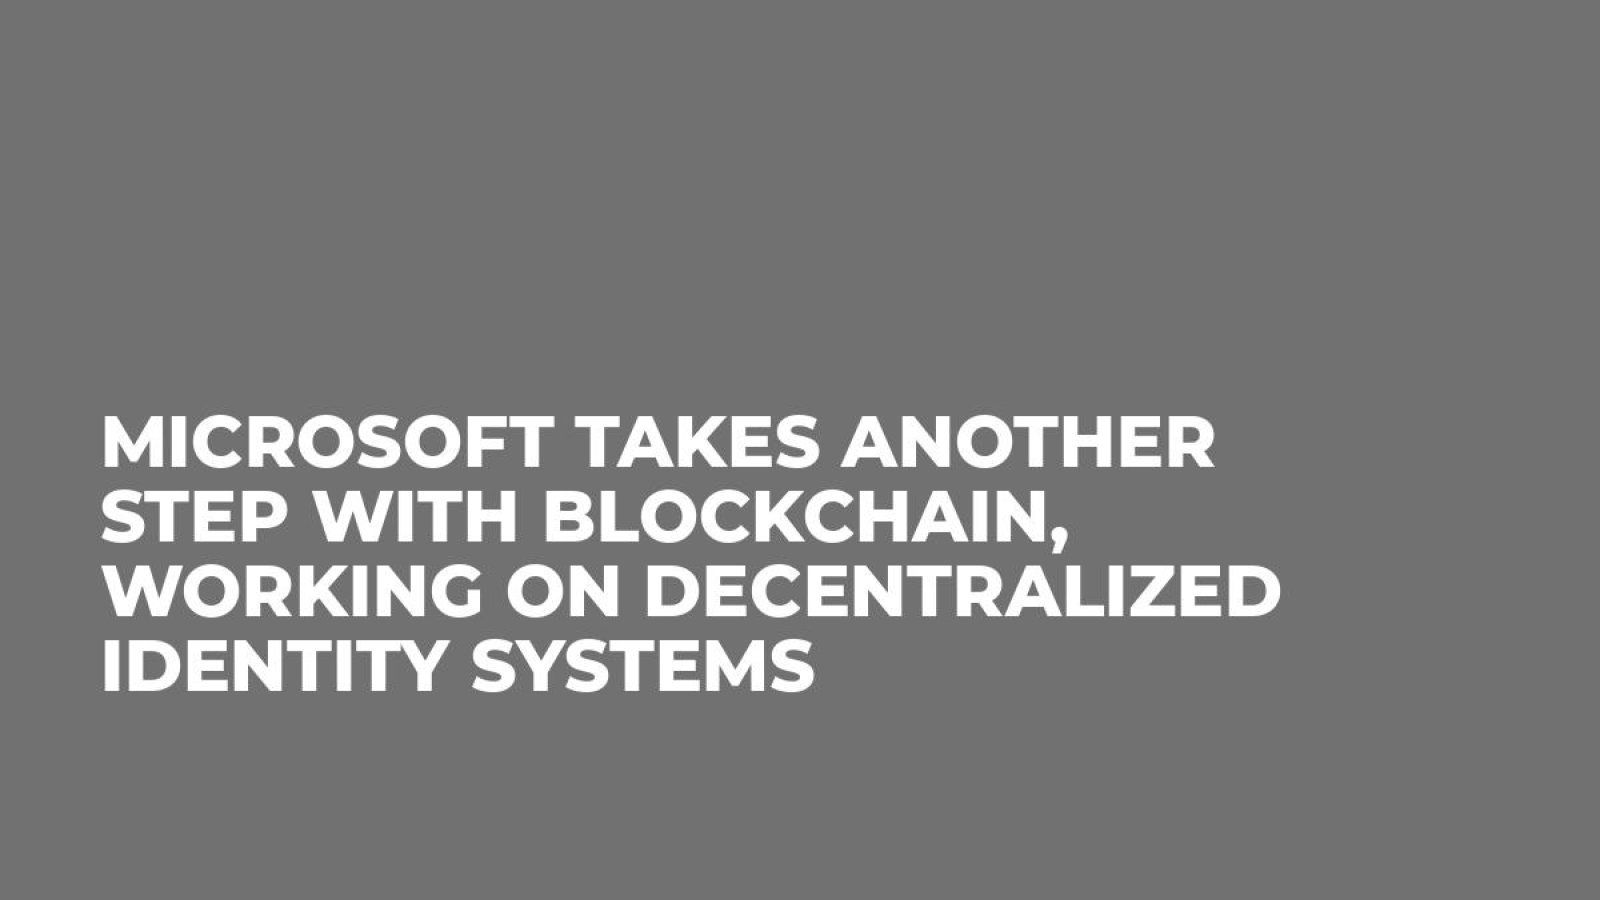 Microsoft Takes Another Step With Blockchain, Working on Decentralized Identity Systems